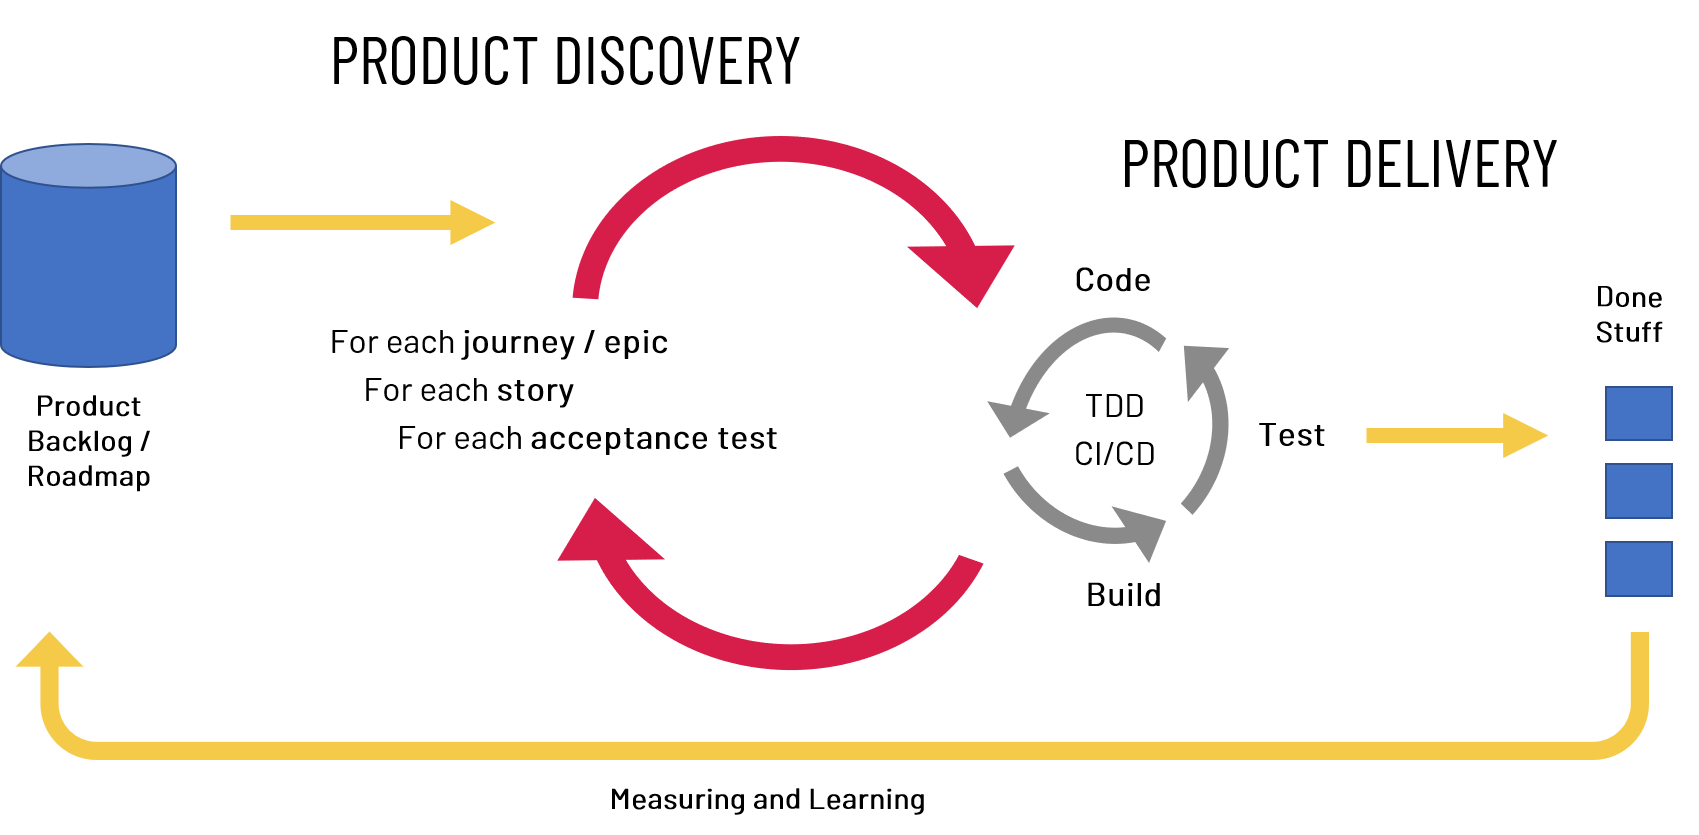 Product Discovery to Product Delivery